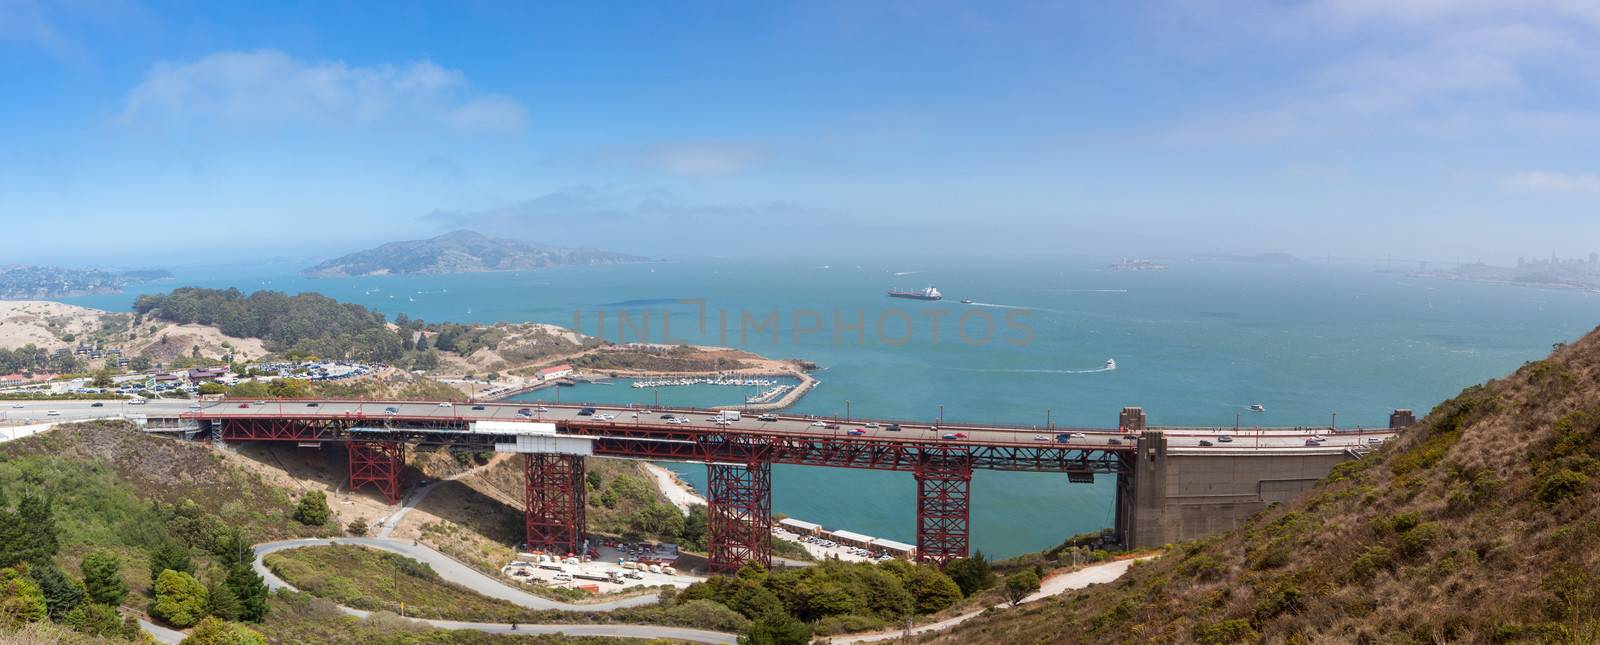 Entrance of the Golden Gate under restoration with the bay and the Pacific Ocean with ships in the background, San Francisco, California, USA.